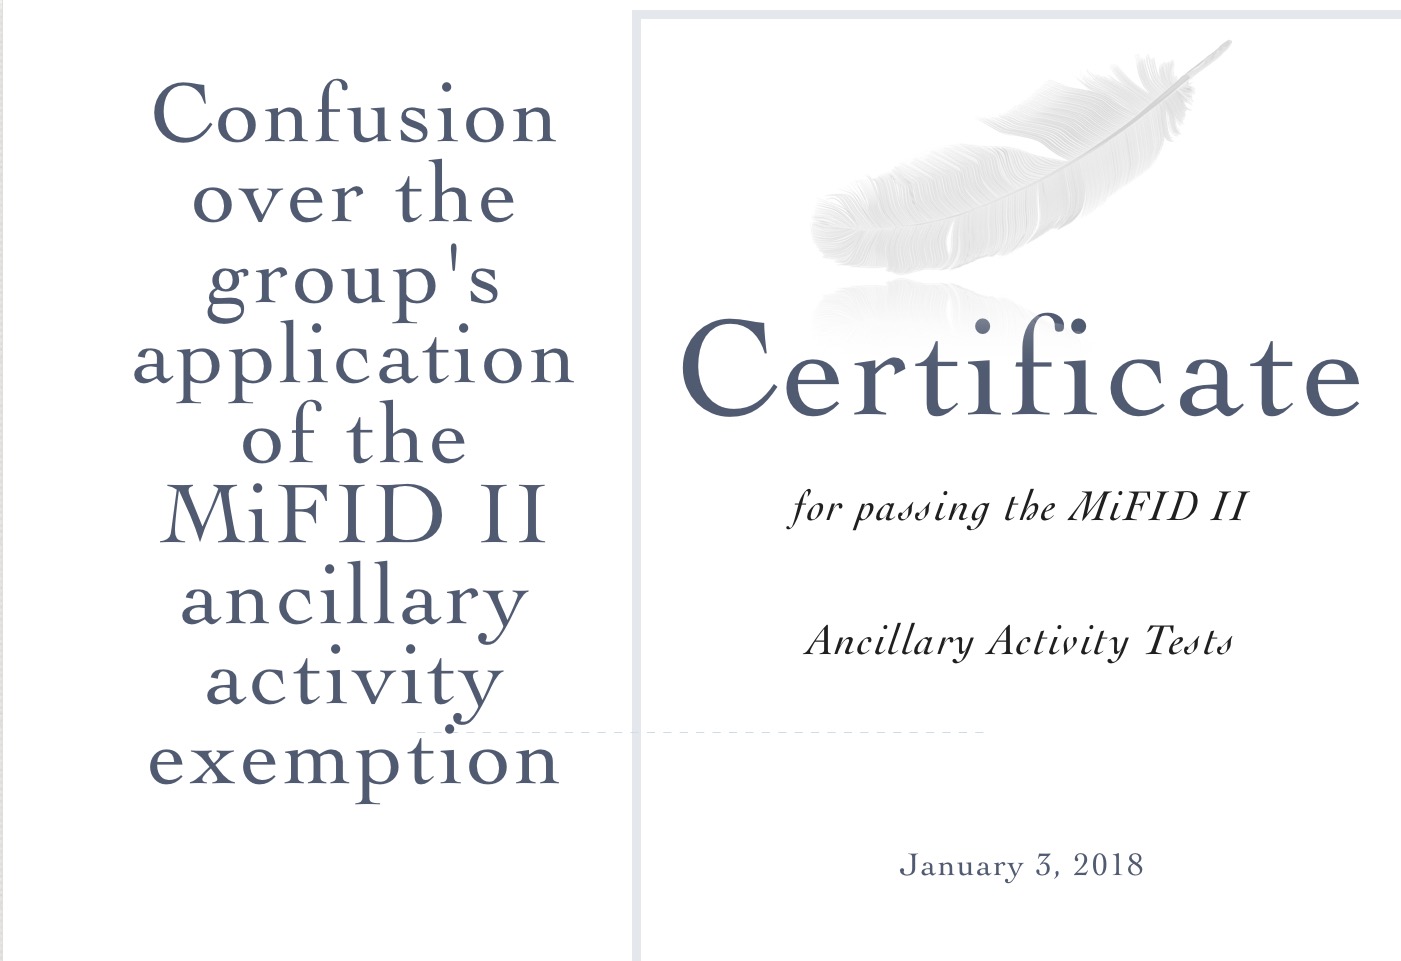 Certificate for passing the MiFID II Ancillary Activity Tests